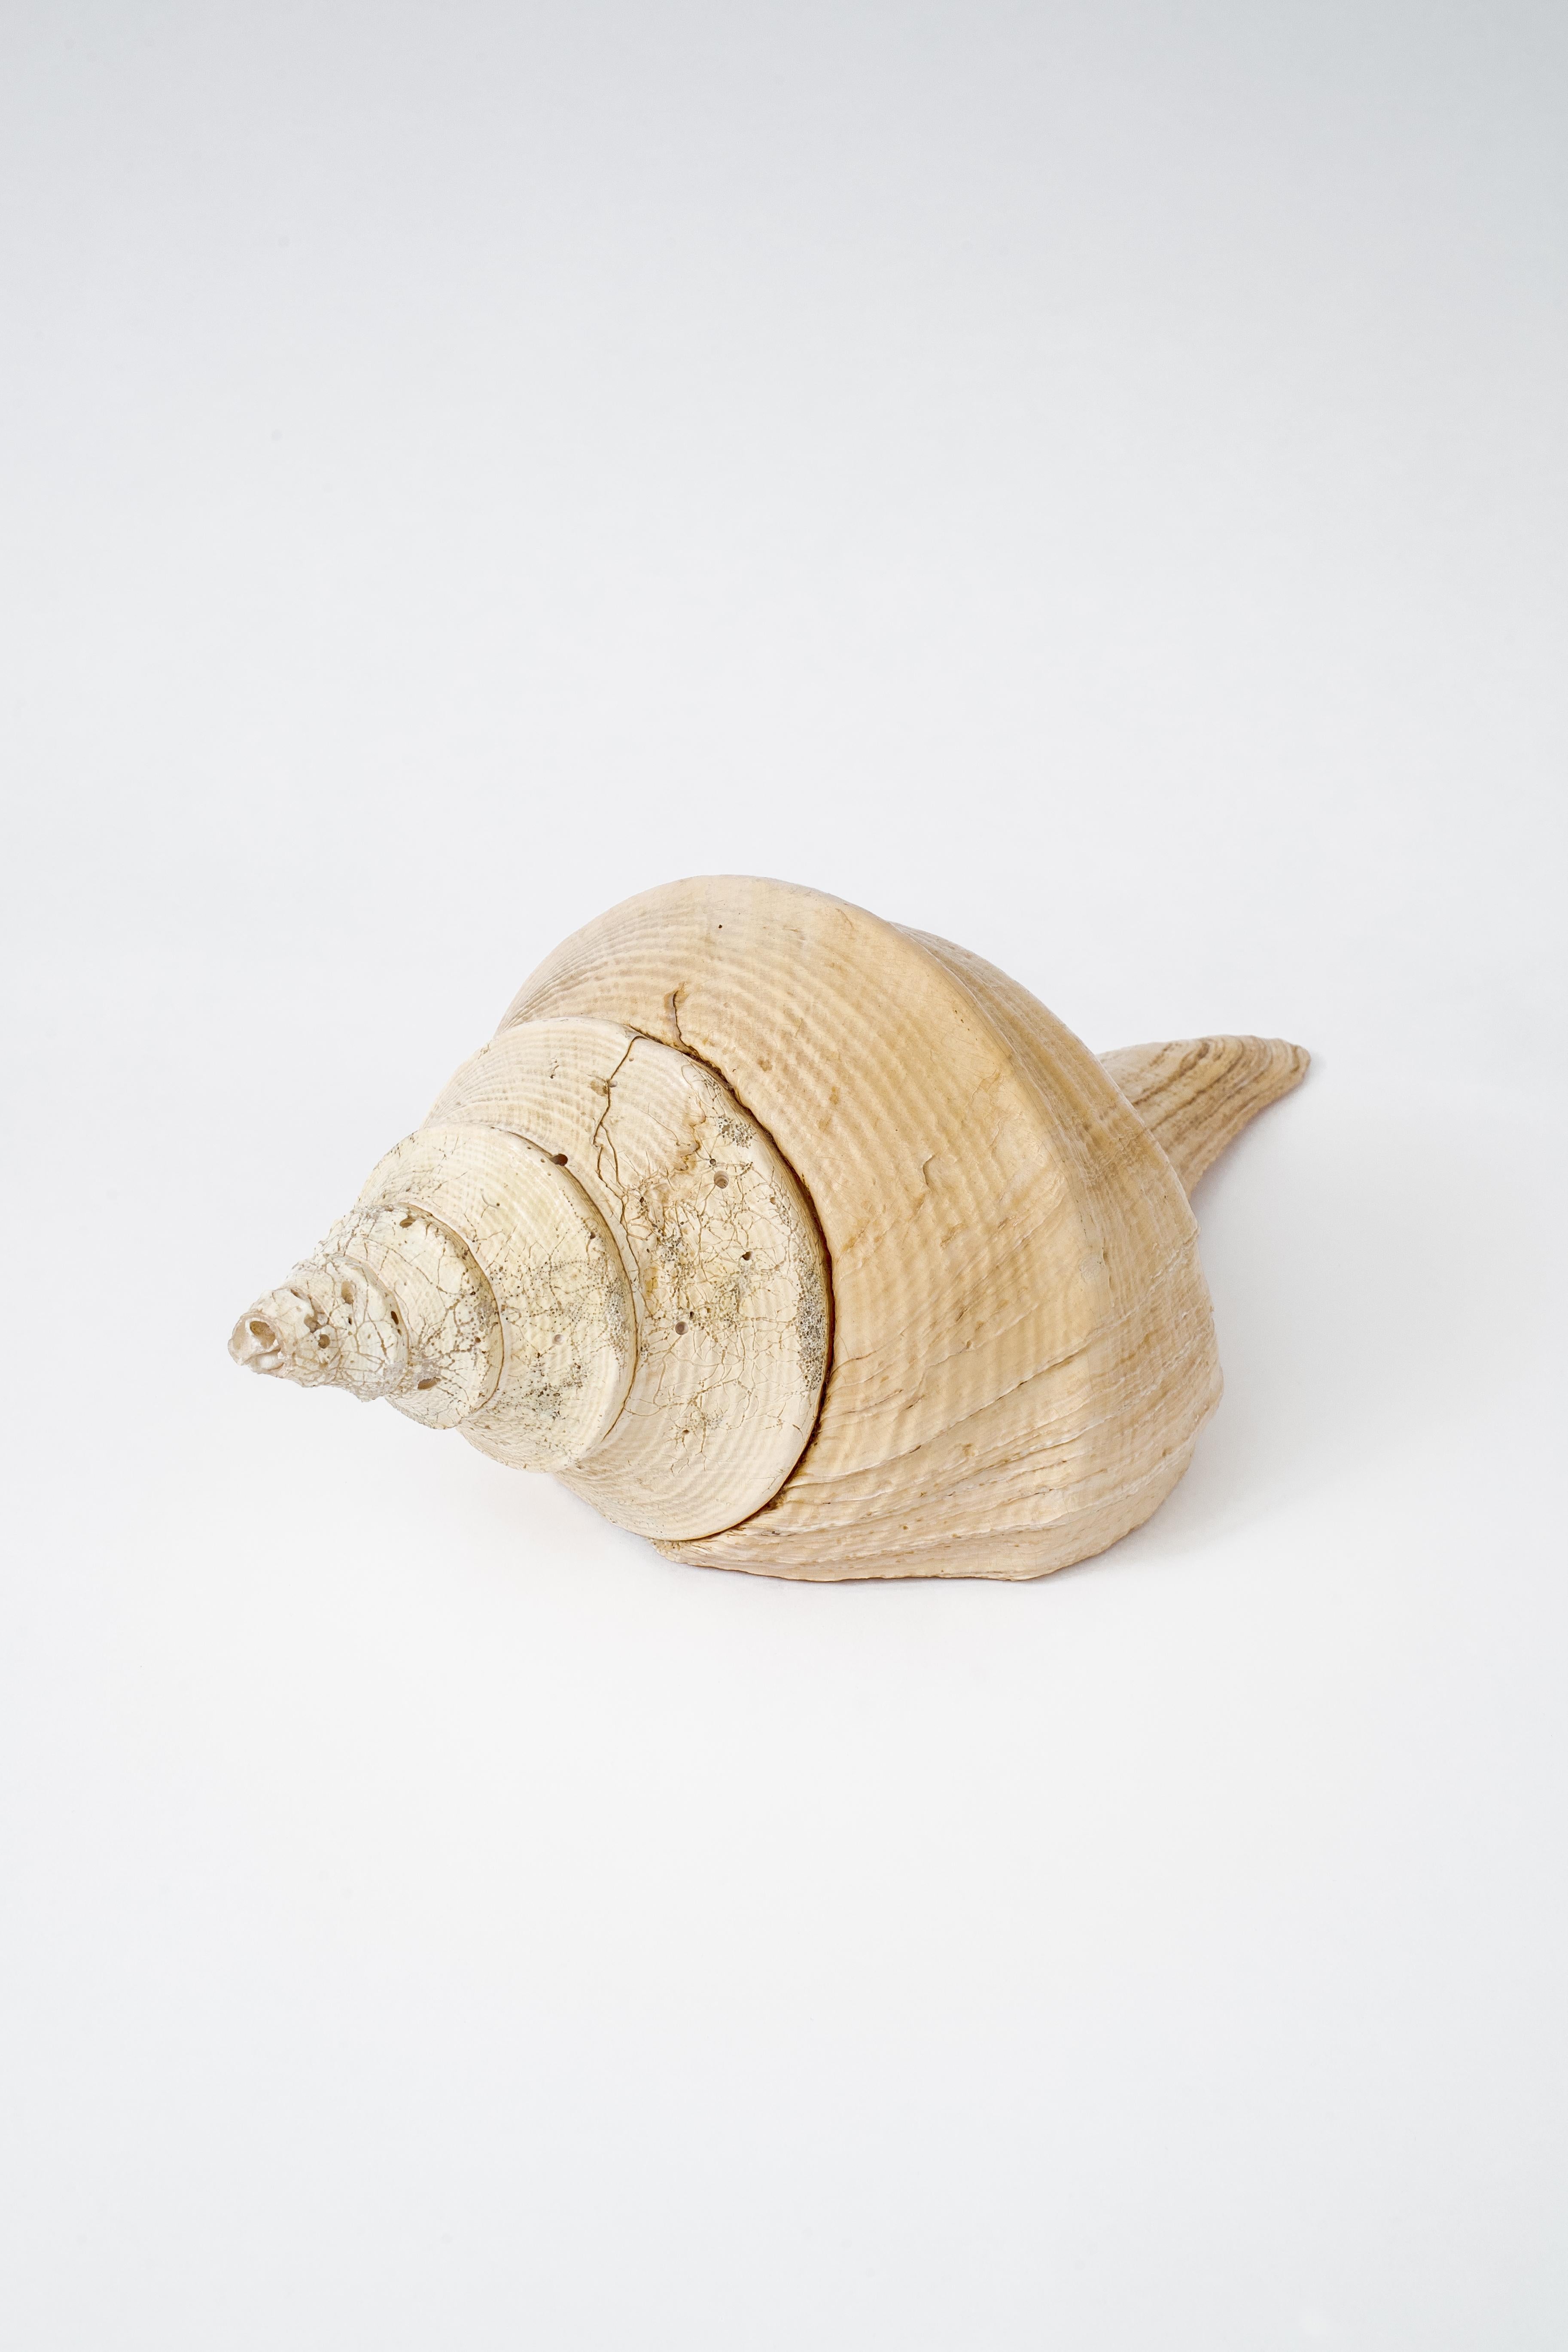 Mid-Century Modern Very Large Natural Conch Shell, Pacific Ocean, 1970’s